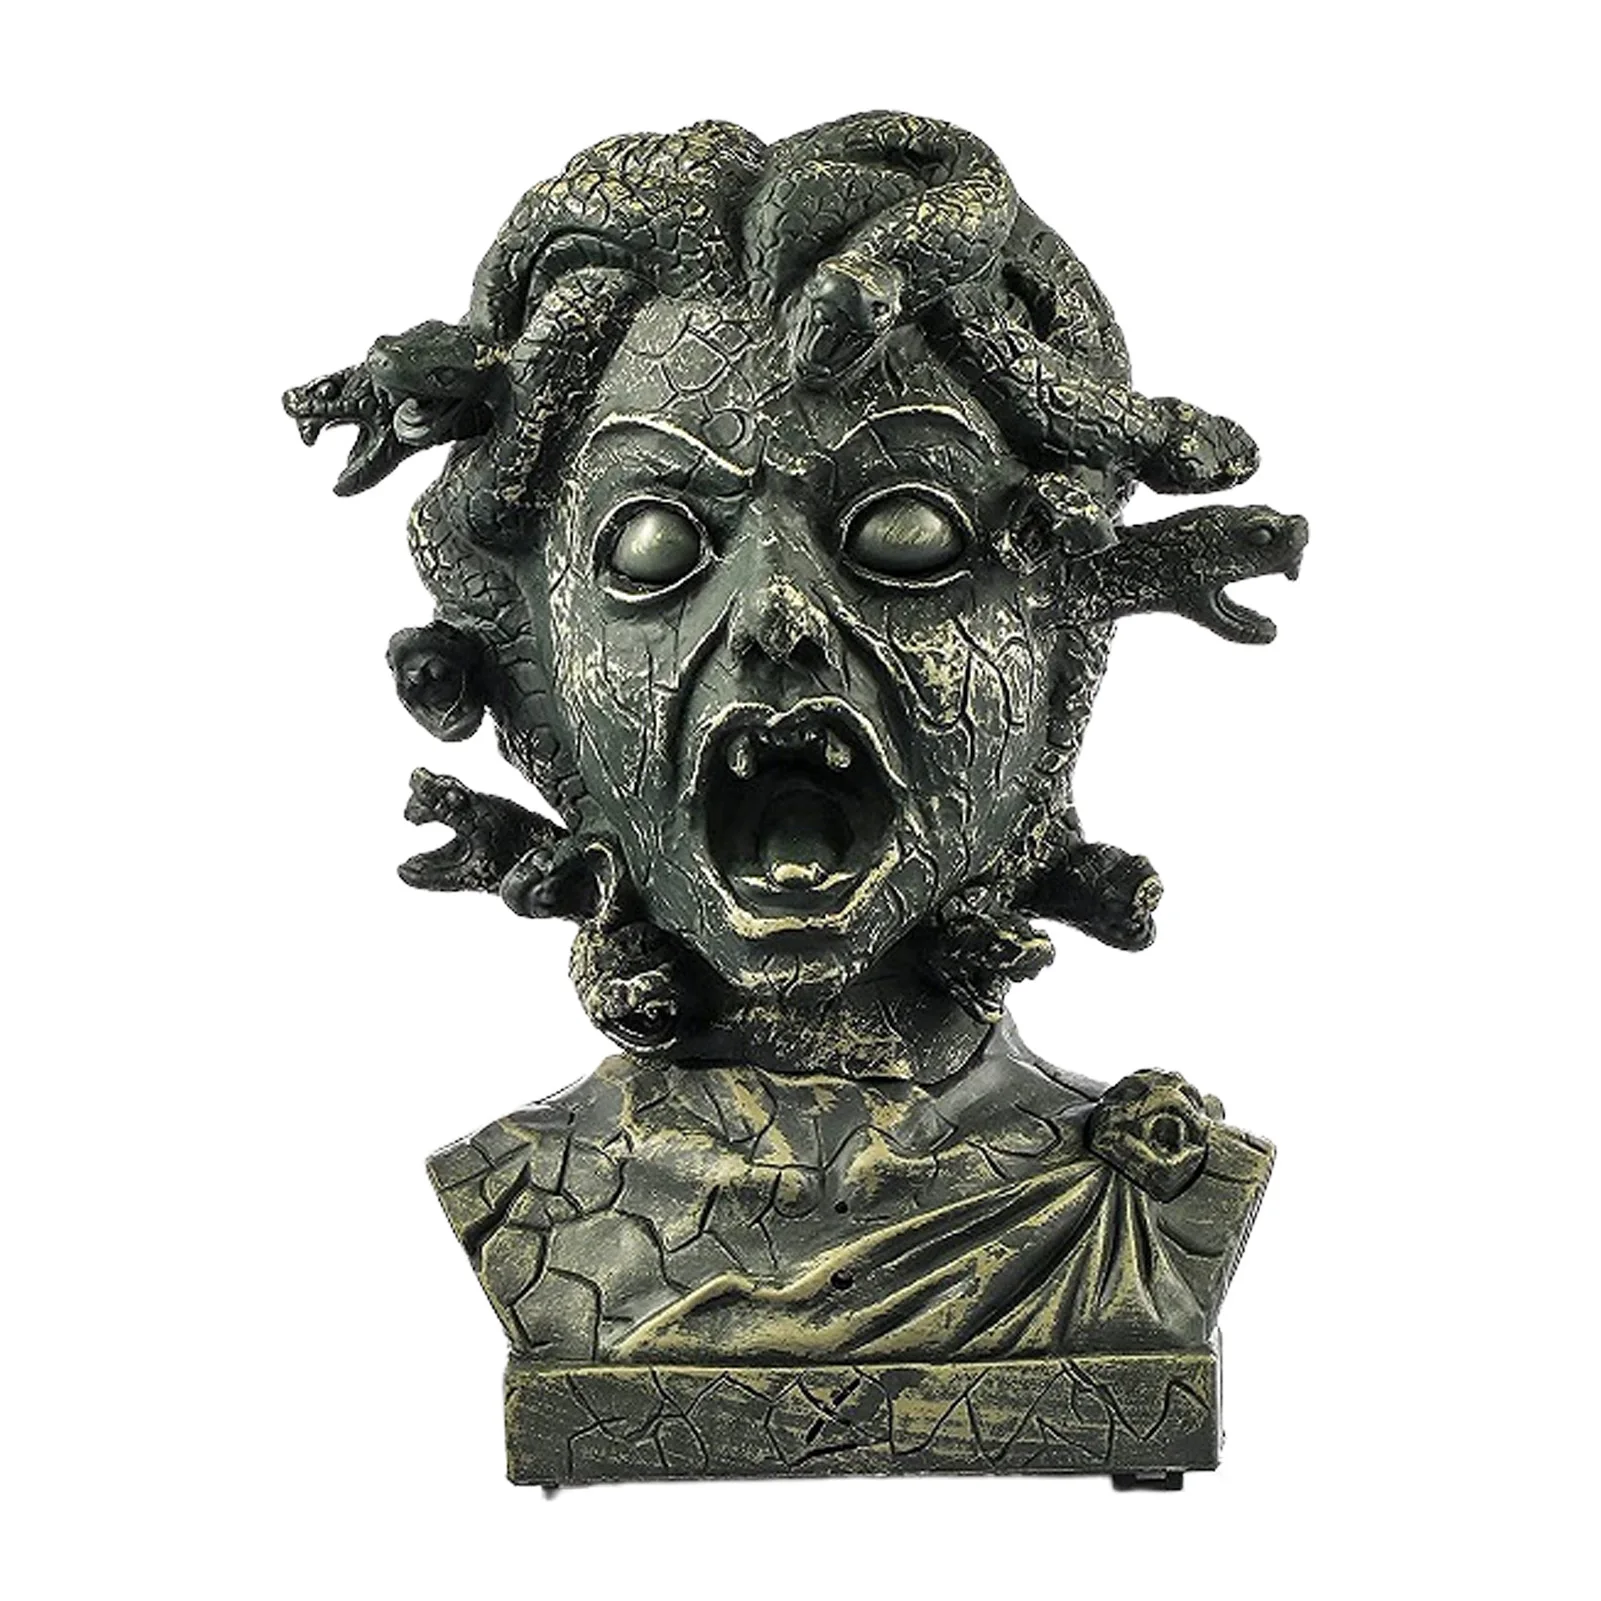 

2022 New Medusa Bust Statue Greek Mythology Monsters Statue Gothic Myth Legend Serpents Statues Home Decorations Crafts Gifts